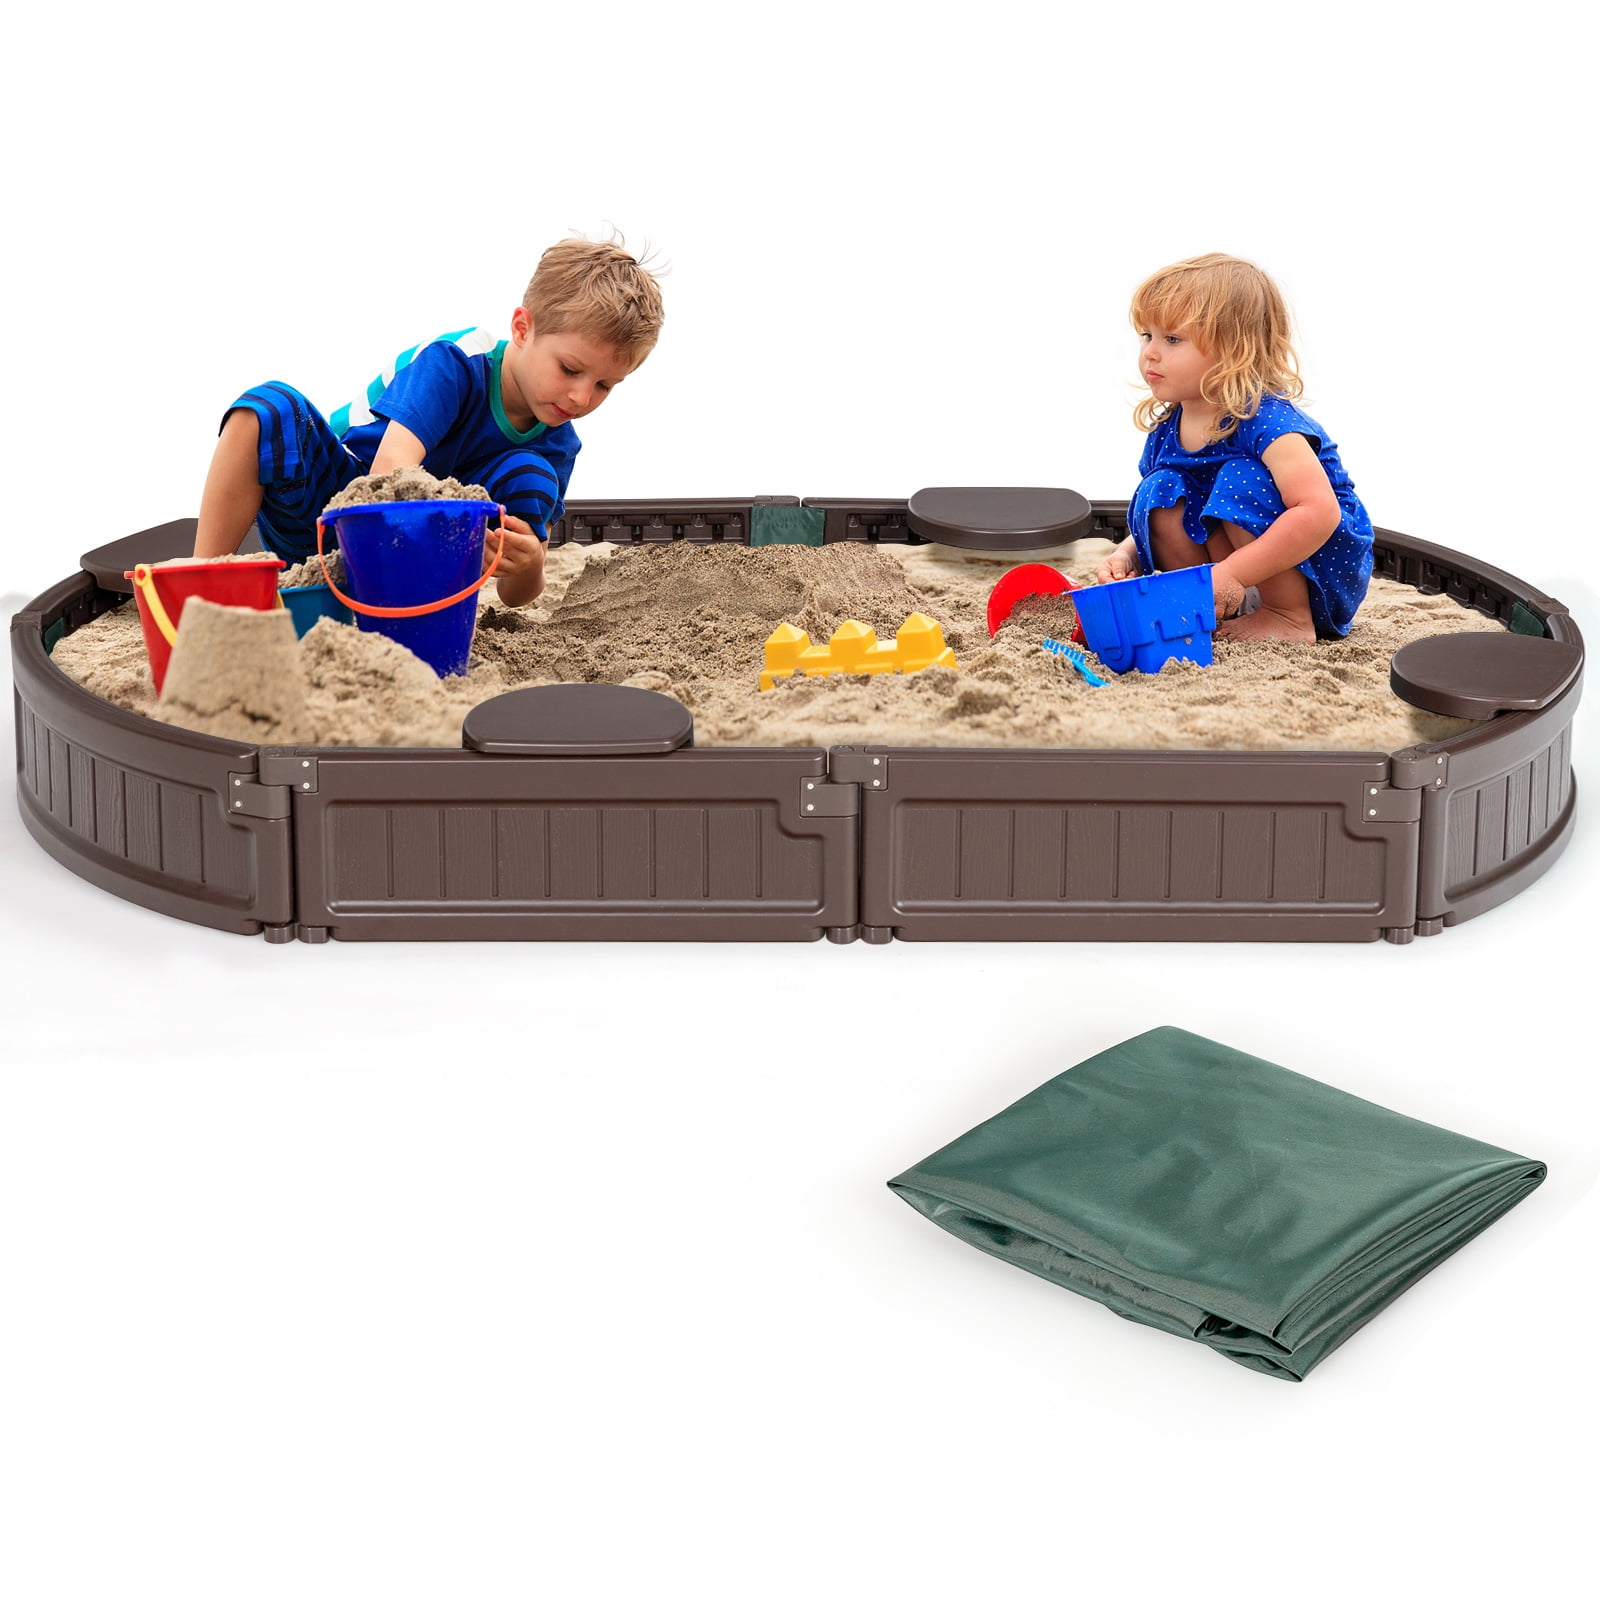 Sand box Toy Sandbox Play Playful Seats Lid Turtle Plastic Cover Kid Outdoor New 